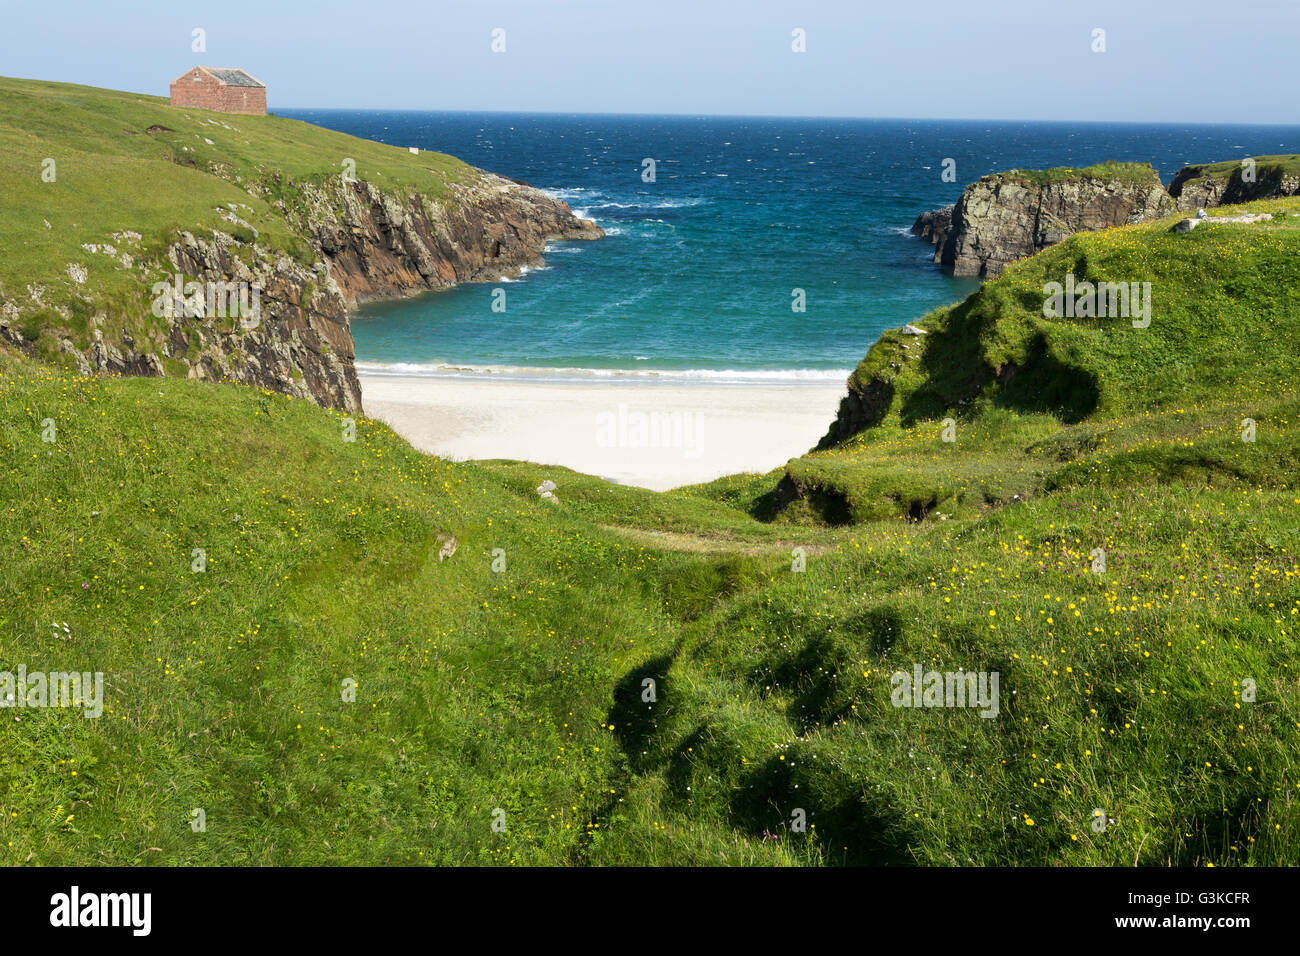 Beautiful green bay with sandy beach and cliffs, Isle of Lewis, Outer Hebrides, Scotland, UK Stock Photo